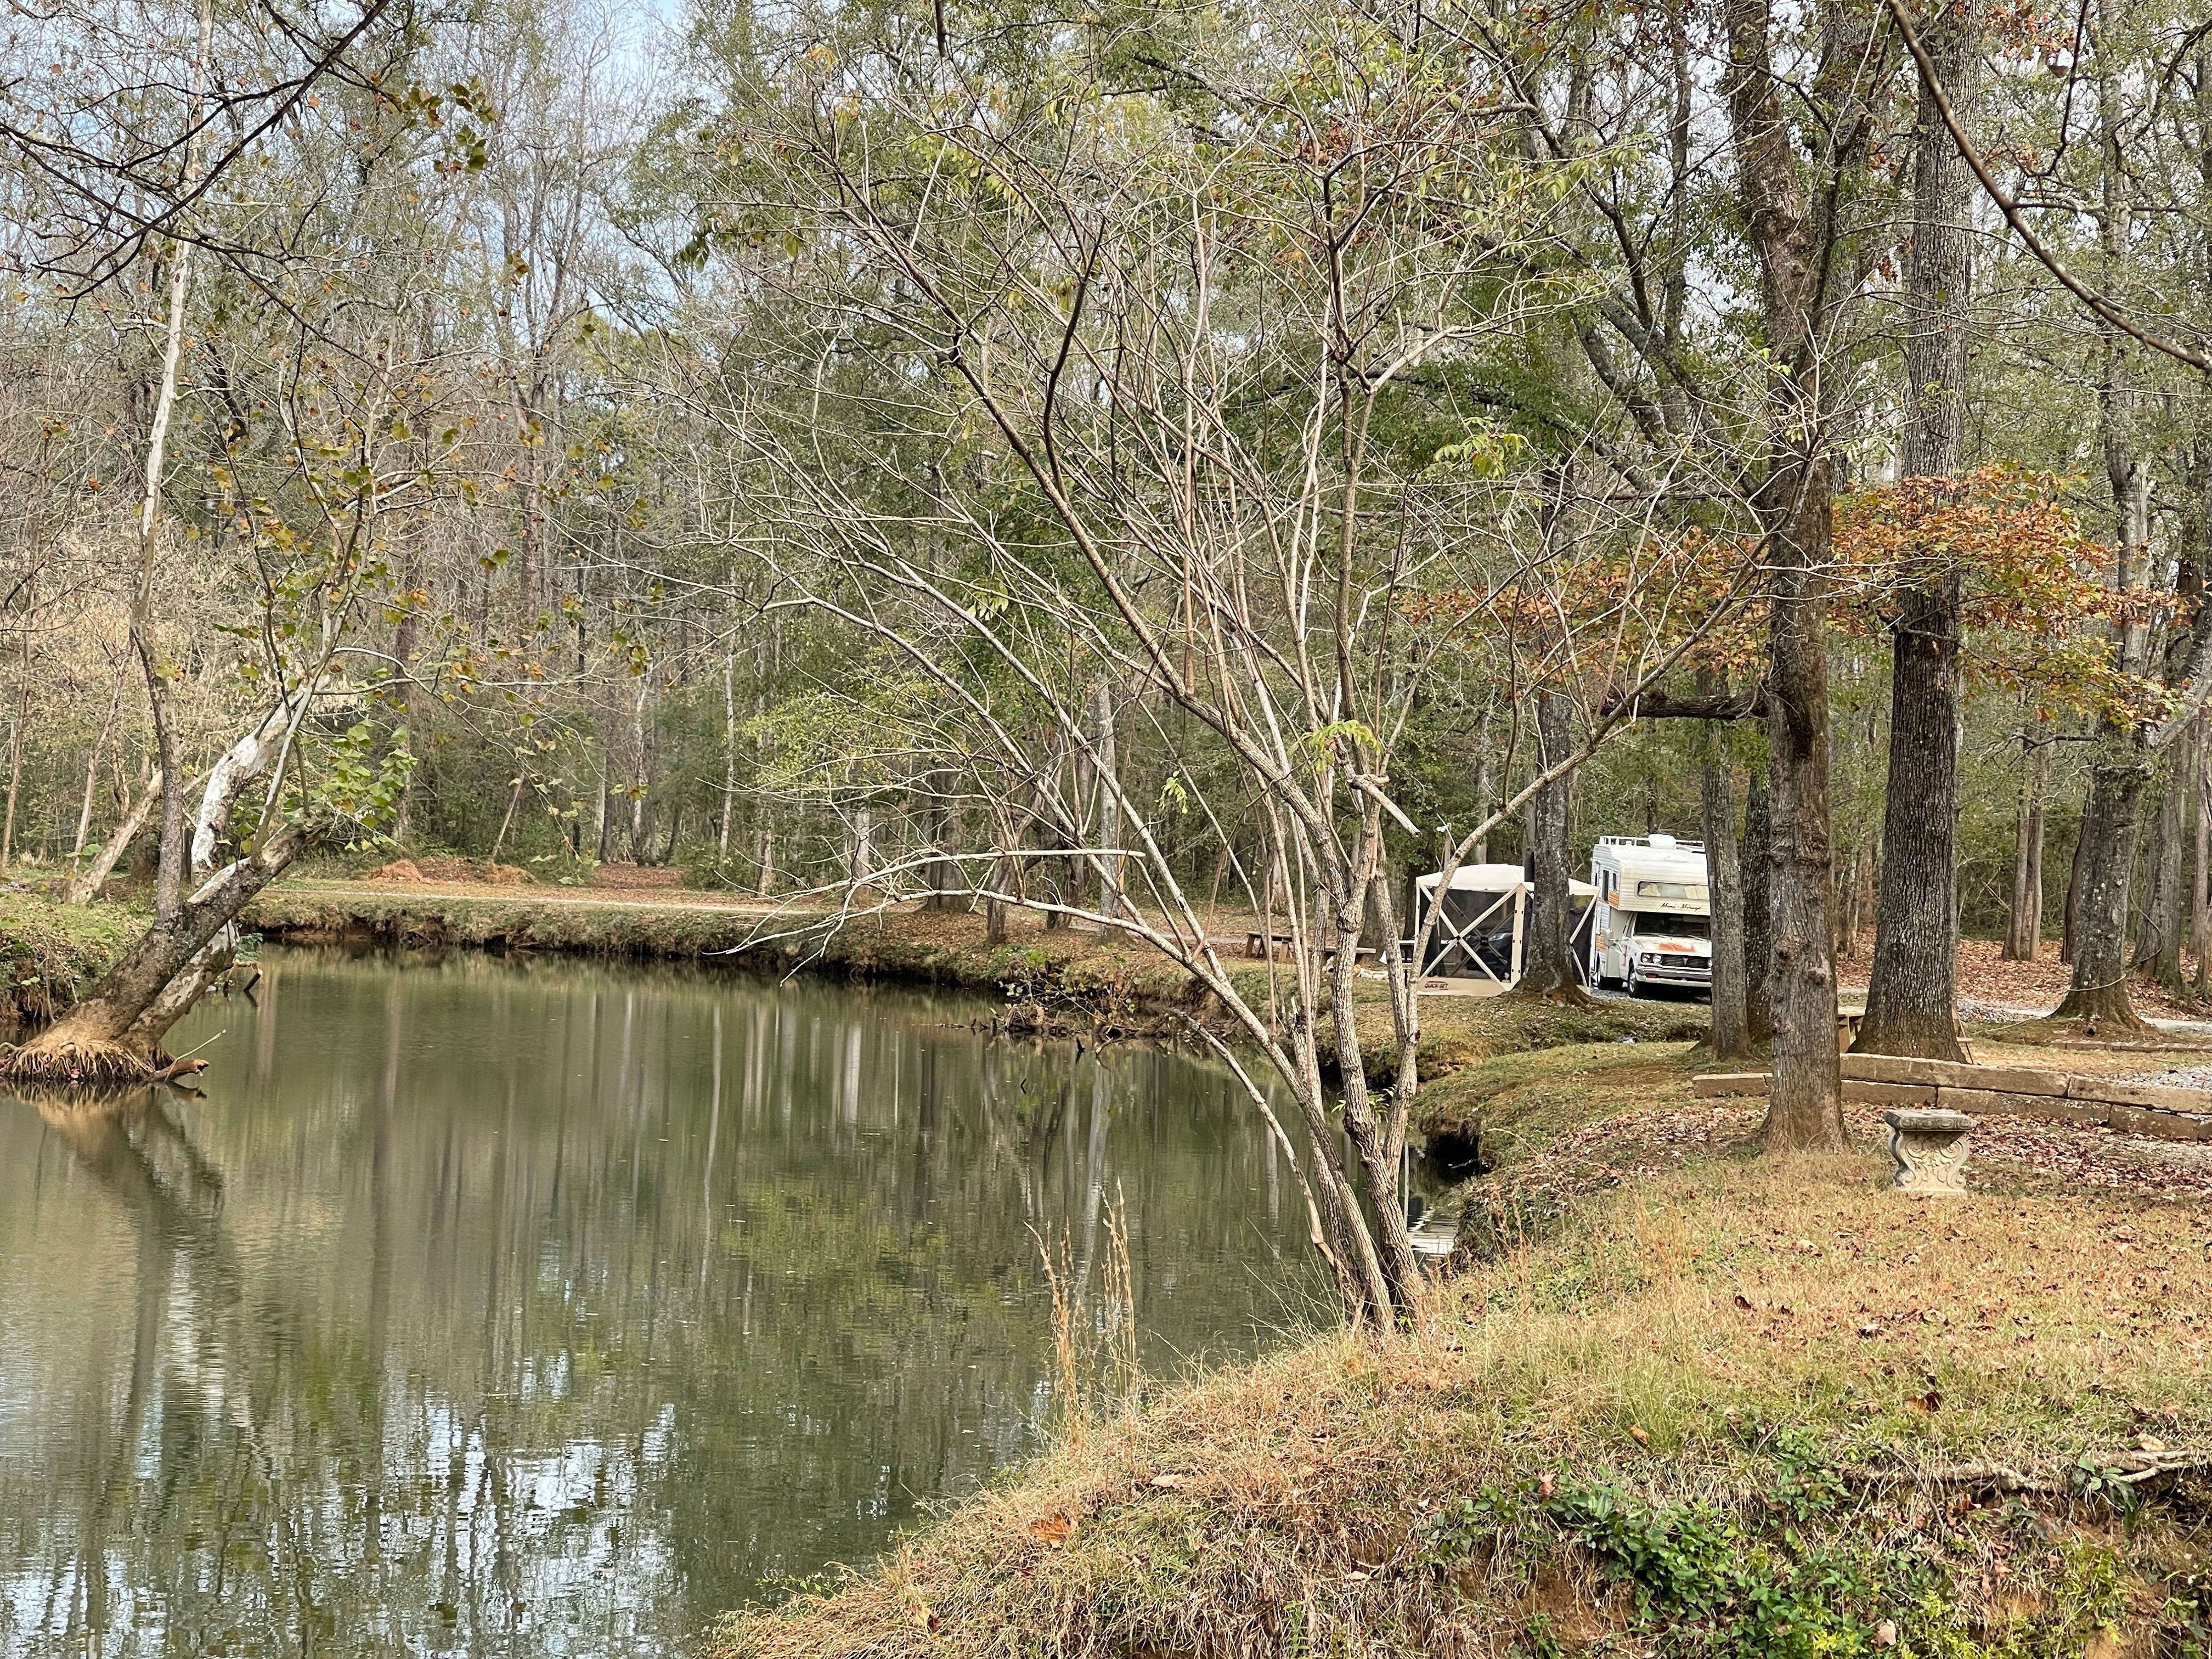 Camper submitted image from Kymulga Gristmill Park - 5